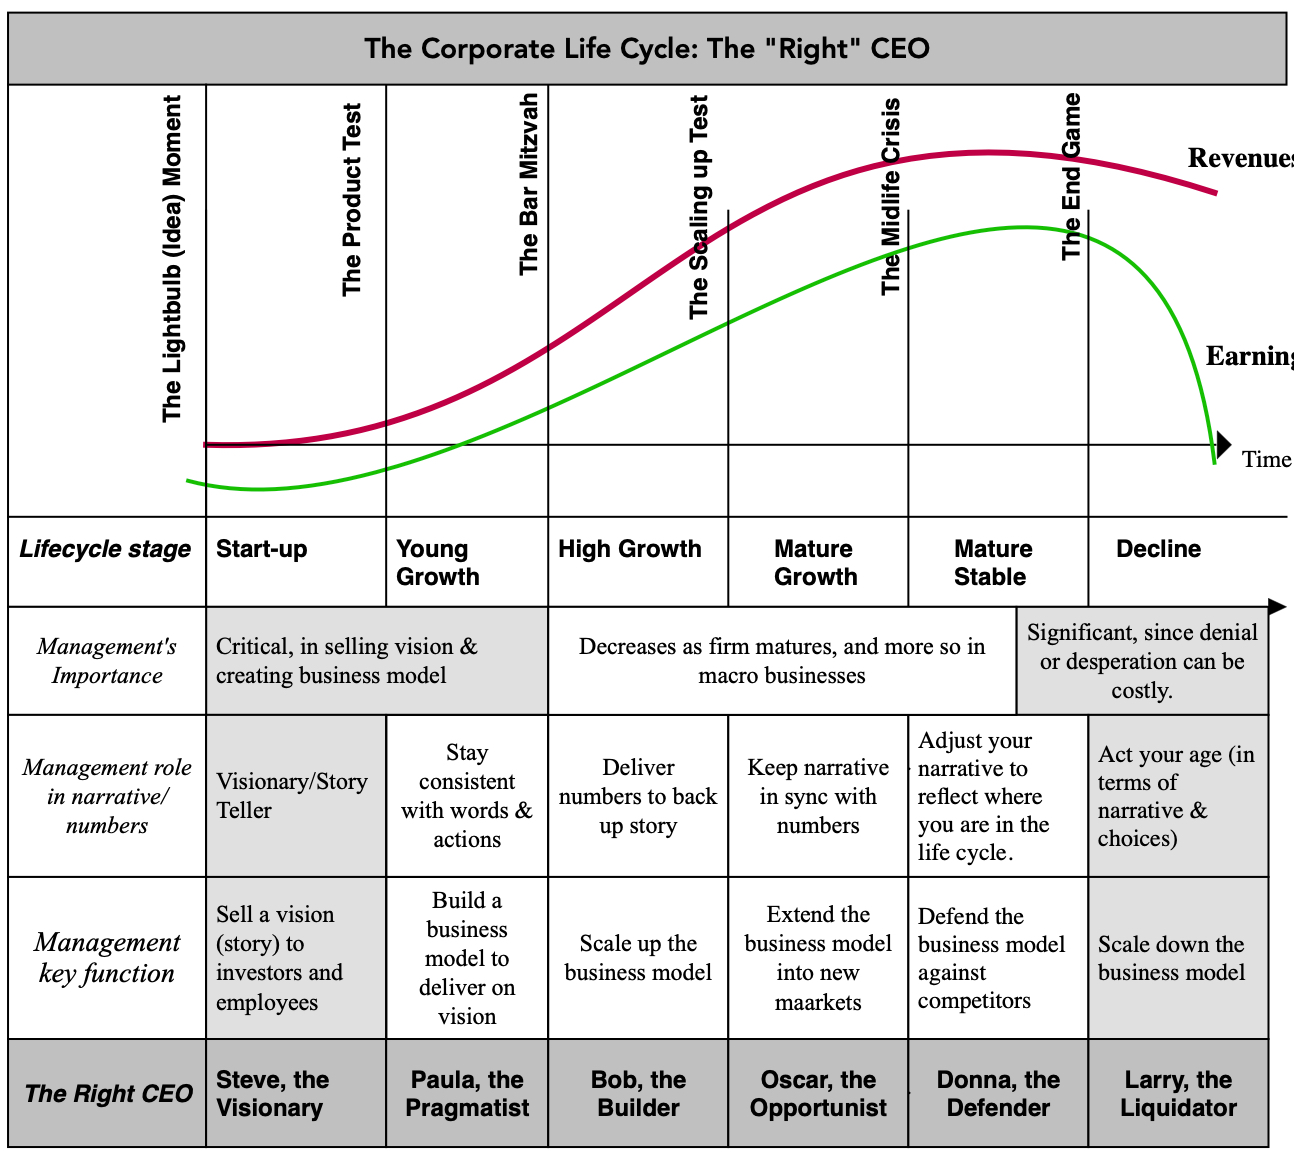 The Corporate Life Cycle: The "Right" CEO